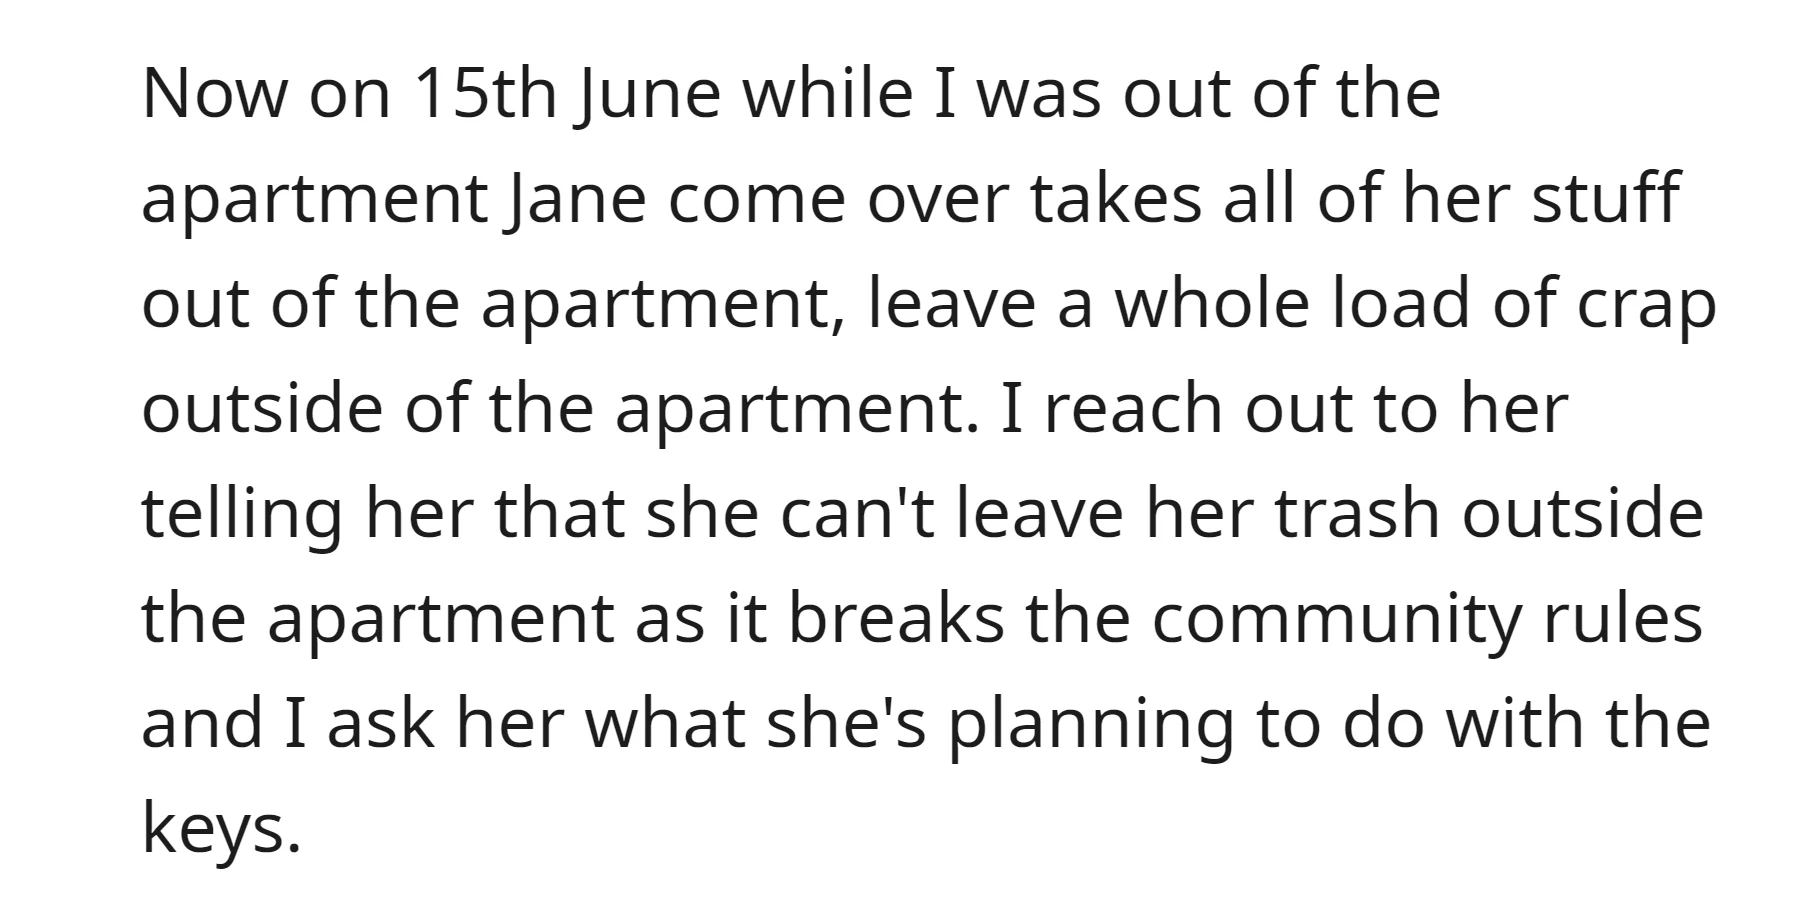 When the ex-roommate moved, she left a mess outside the apartment; therefore, the OP contacted her to reminding about that